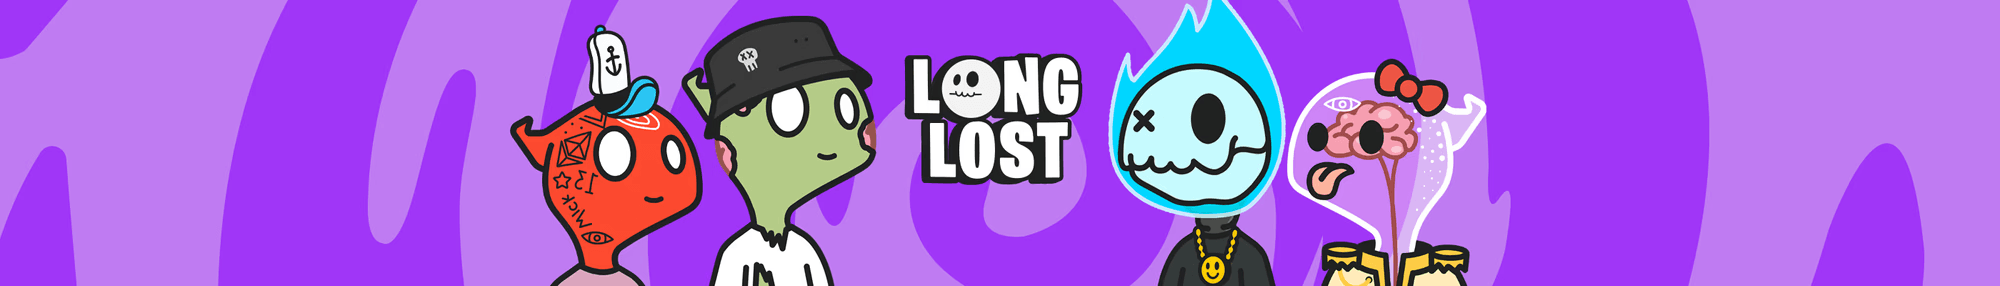 LongLost_Stock 横幅